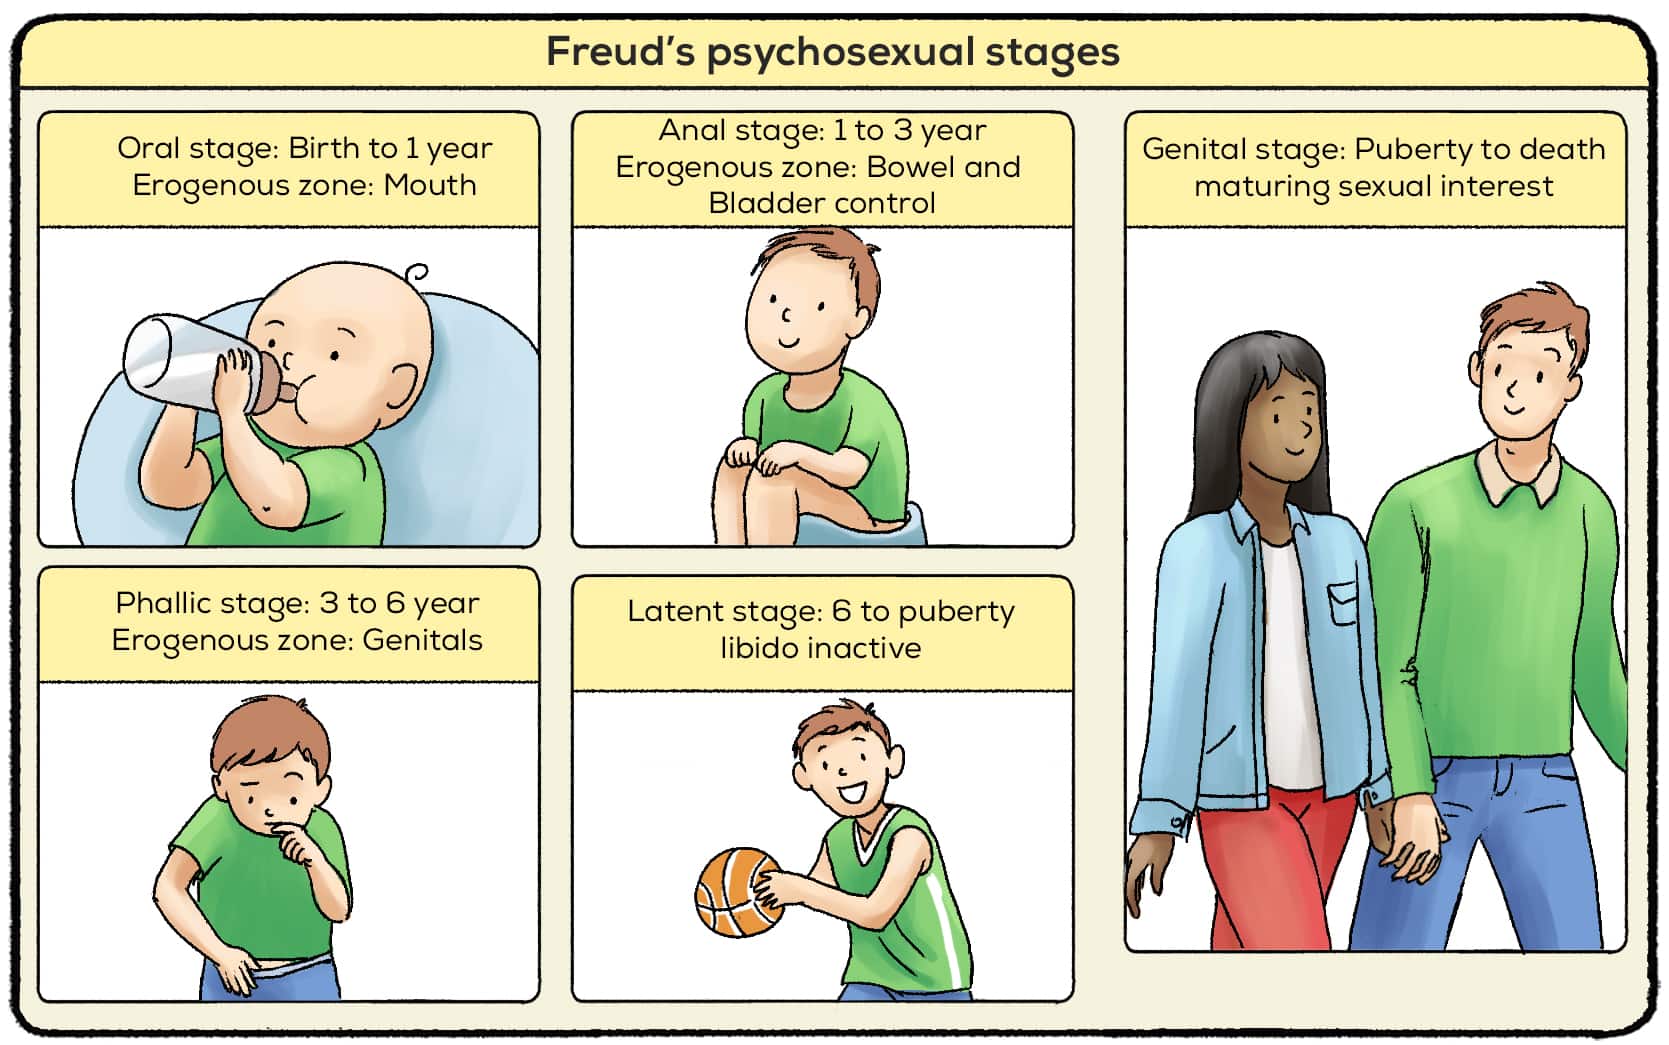 Freud's Stages of Psychosexual Development